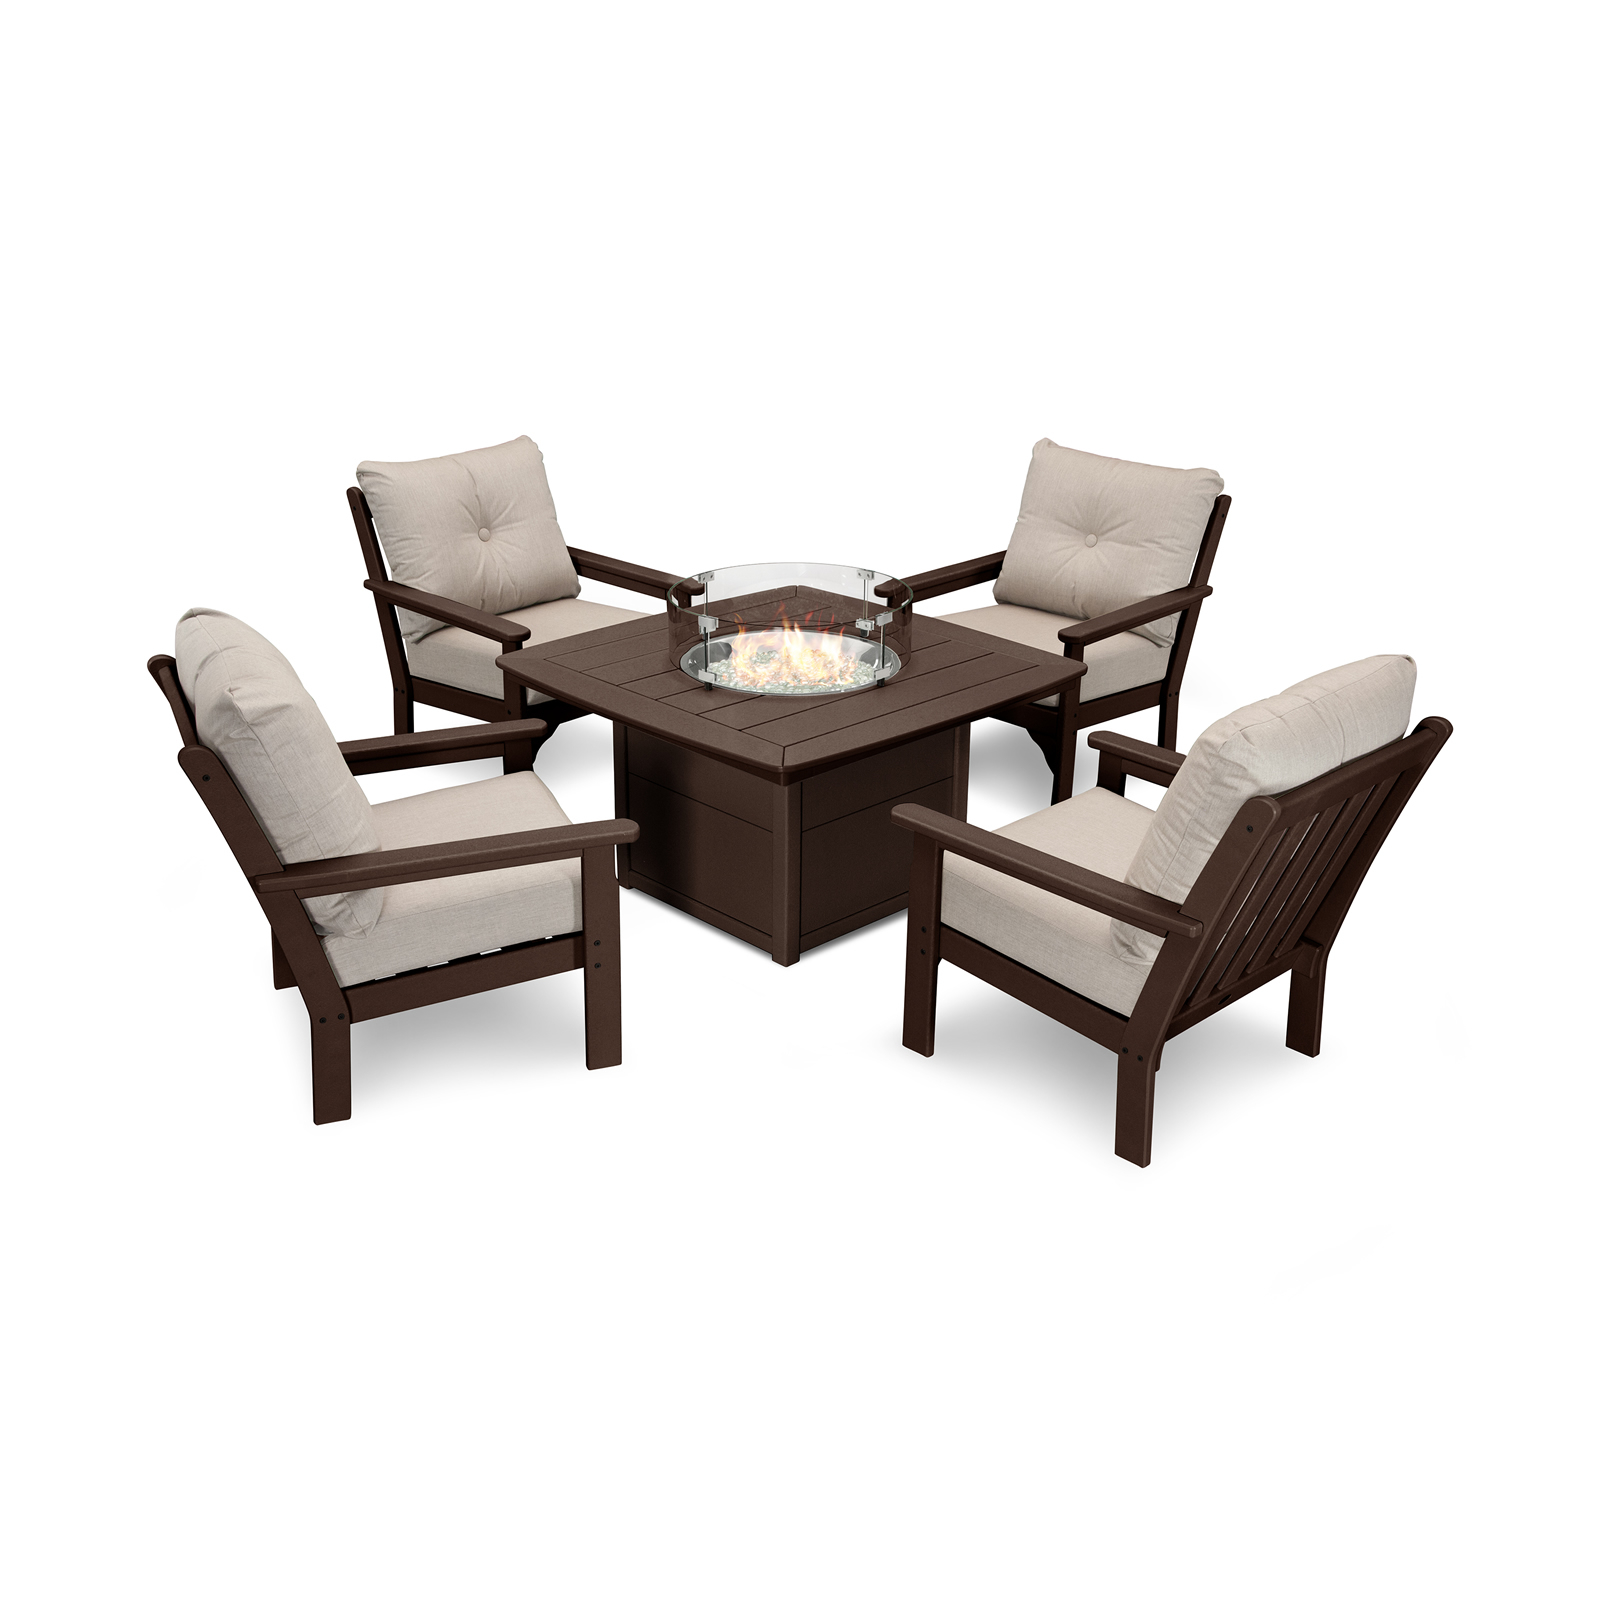 Conversation Set With Fire Pit Table, Polywood Fire Pit Table Reviews